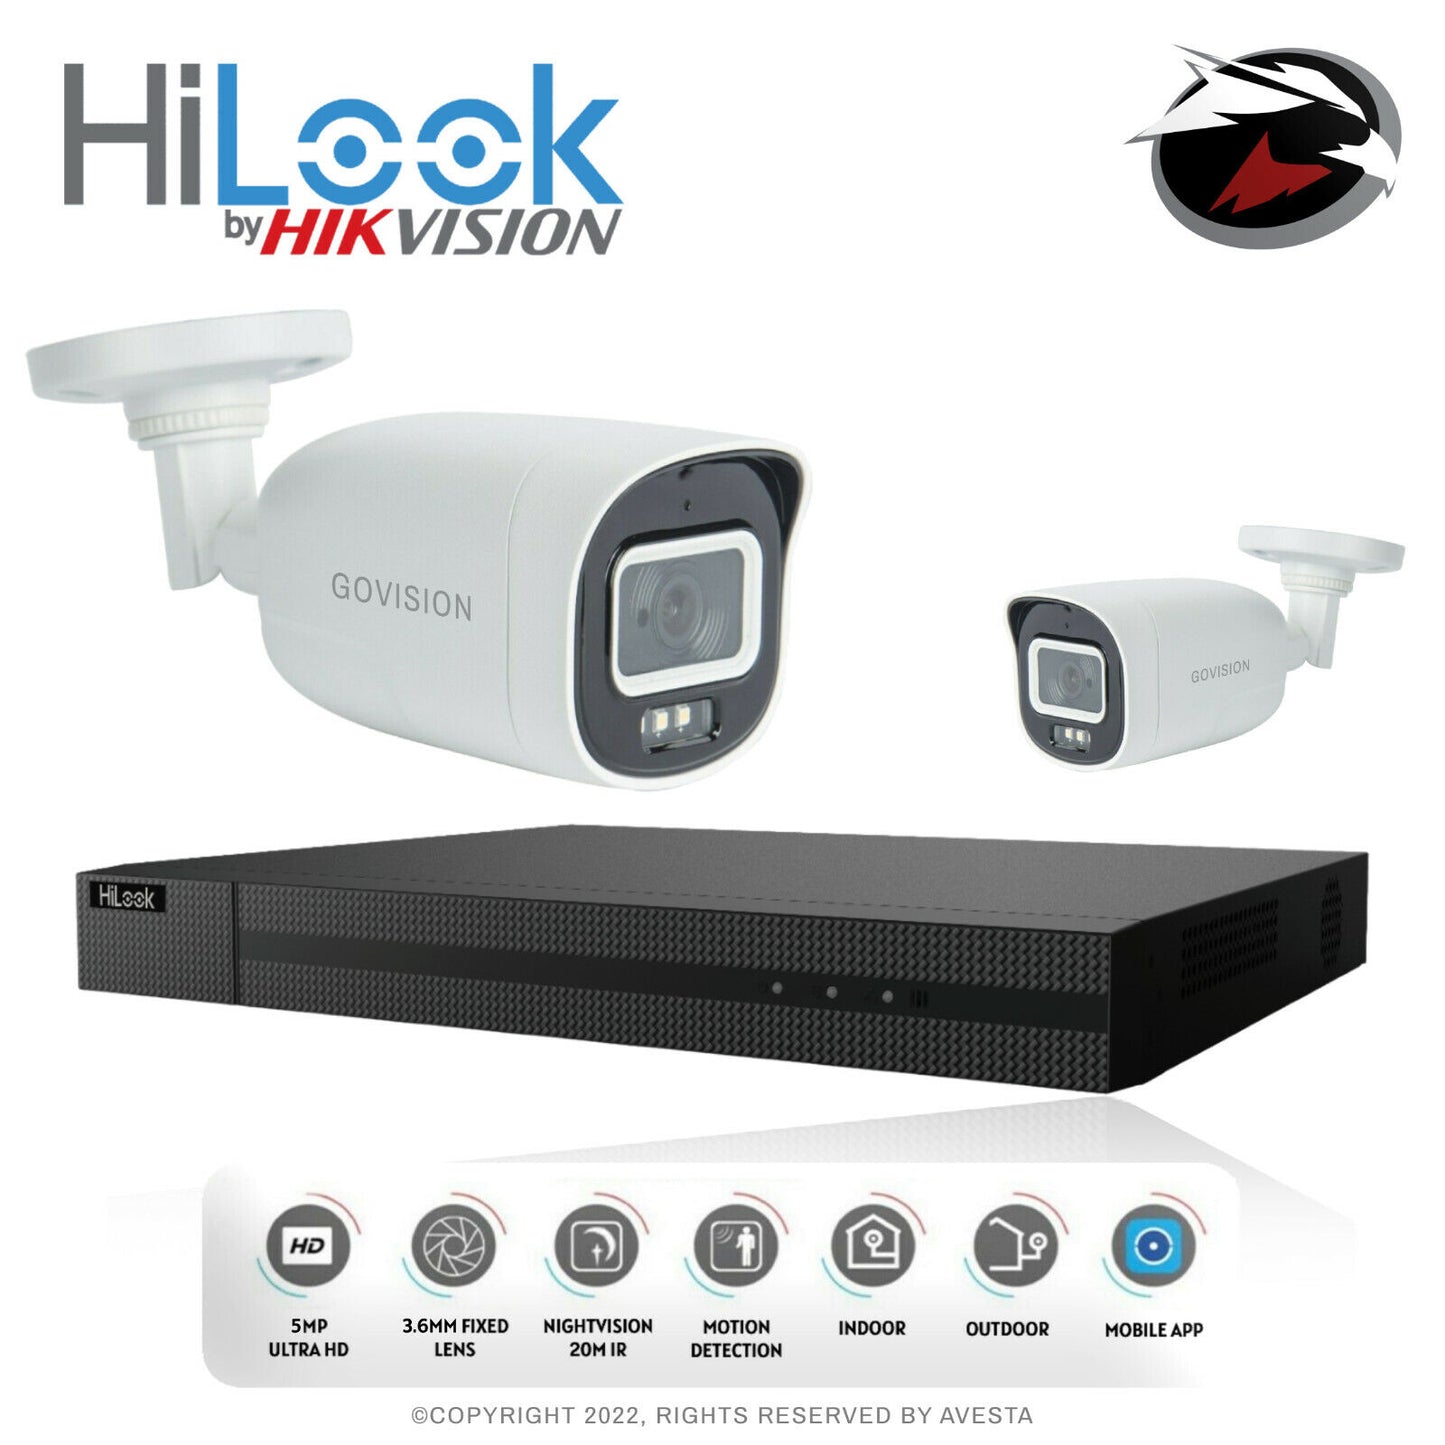 HIKVISION CCTV HD 5MP NIGHT VISION COLORFUL OUTDOOR DVR HOME SECURITY SYSTEM KIT 4CH DVR 2x Cameras (white) 1TB HDD